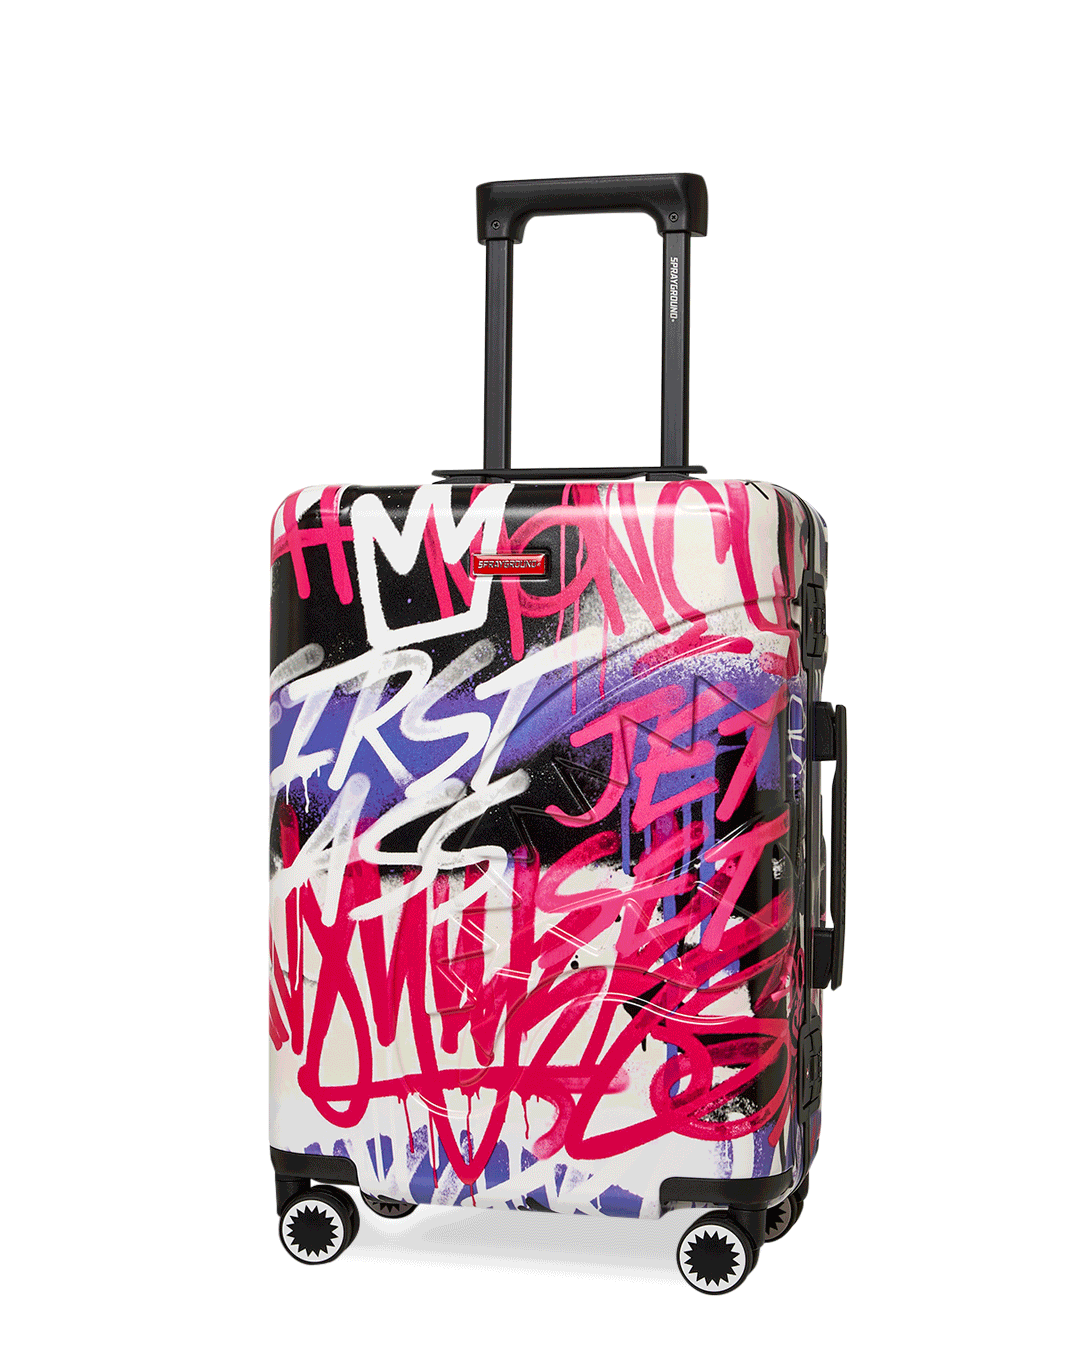 VANDAL COUTURE CARRY-ON LUGGAGE